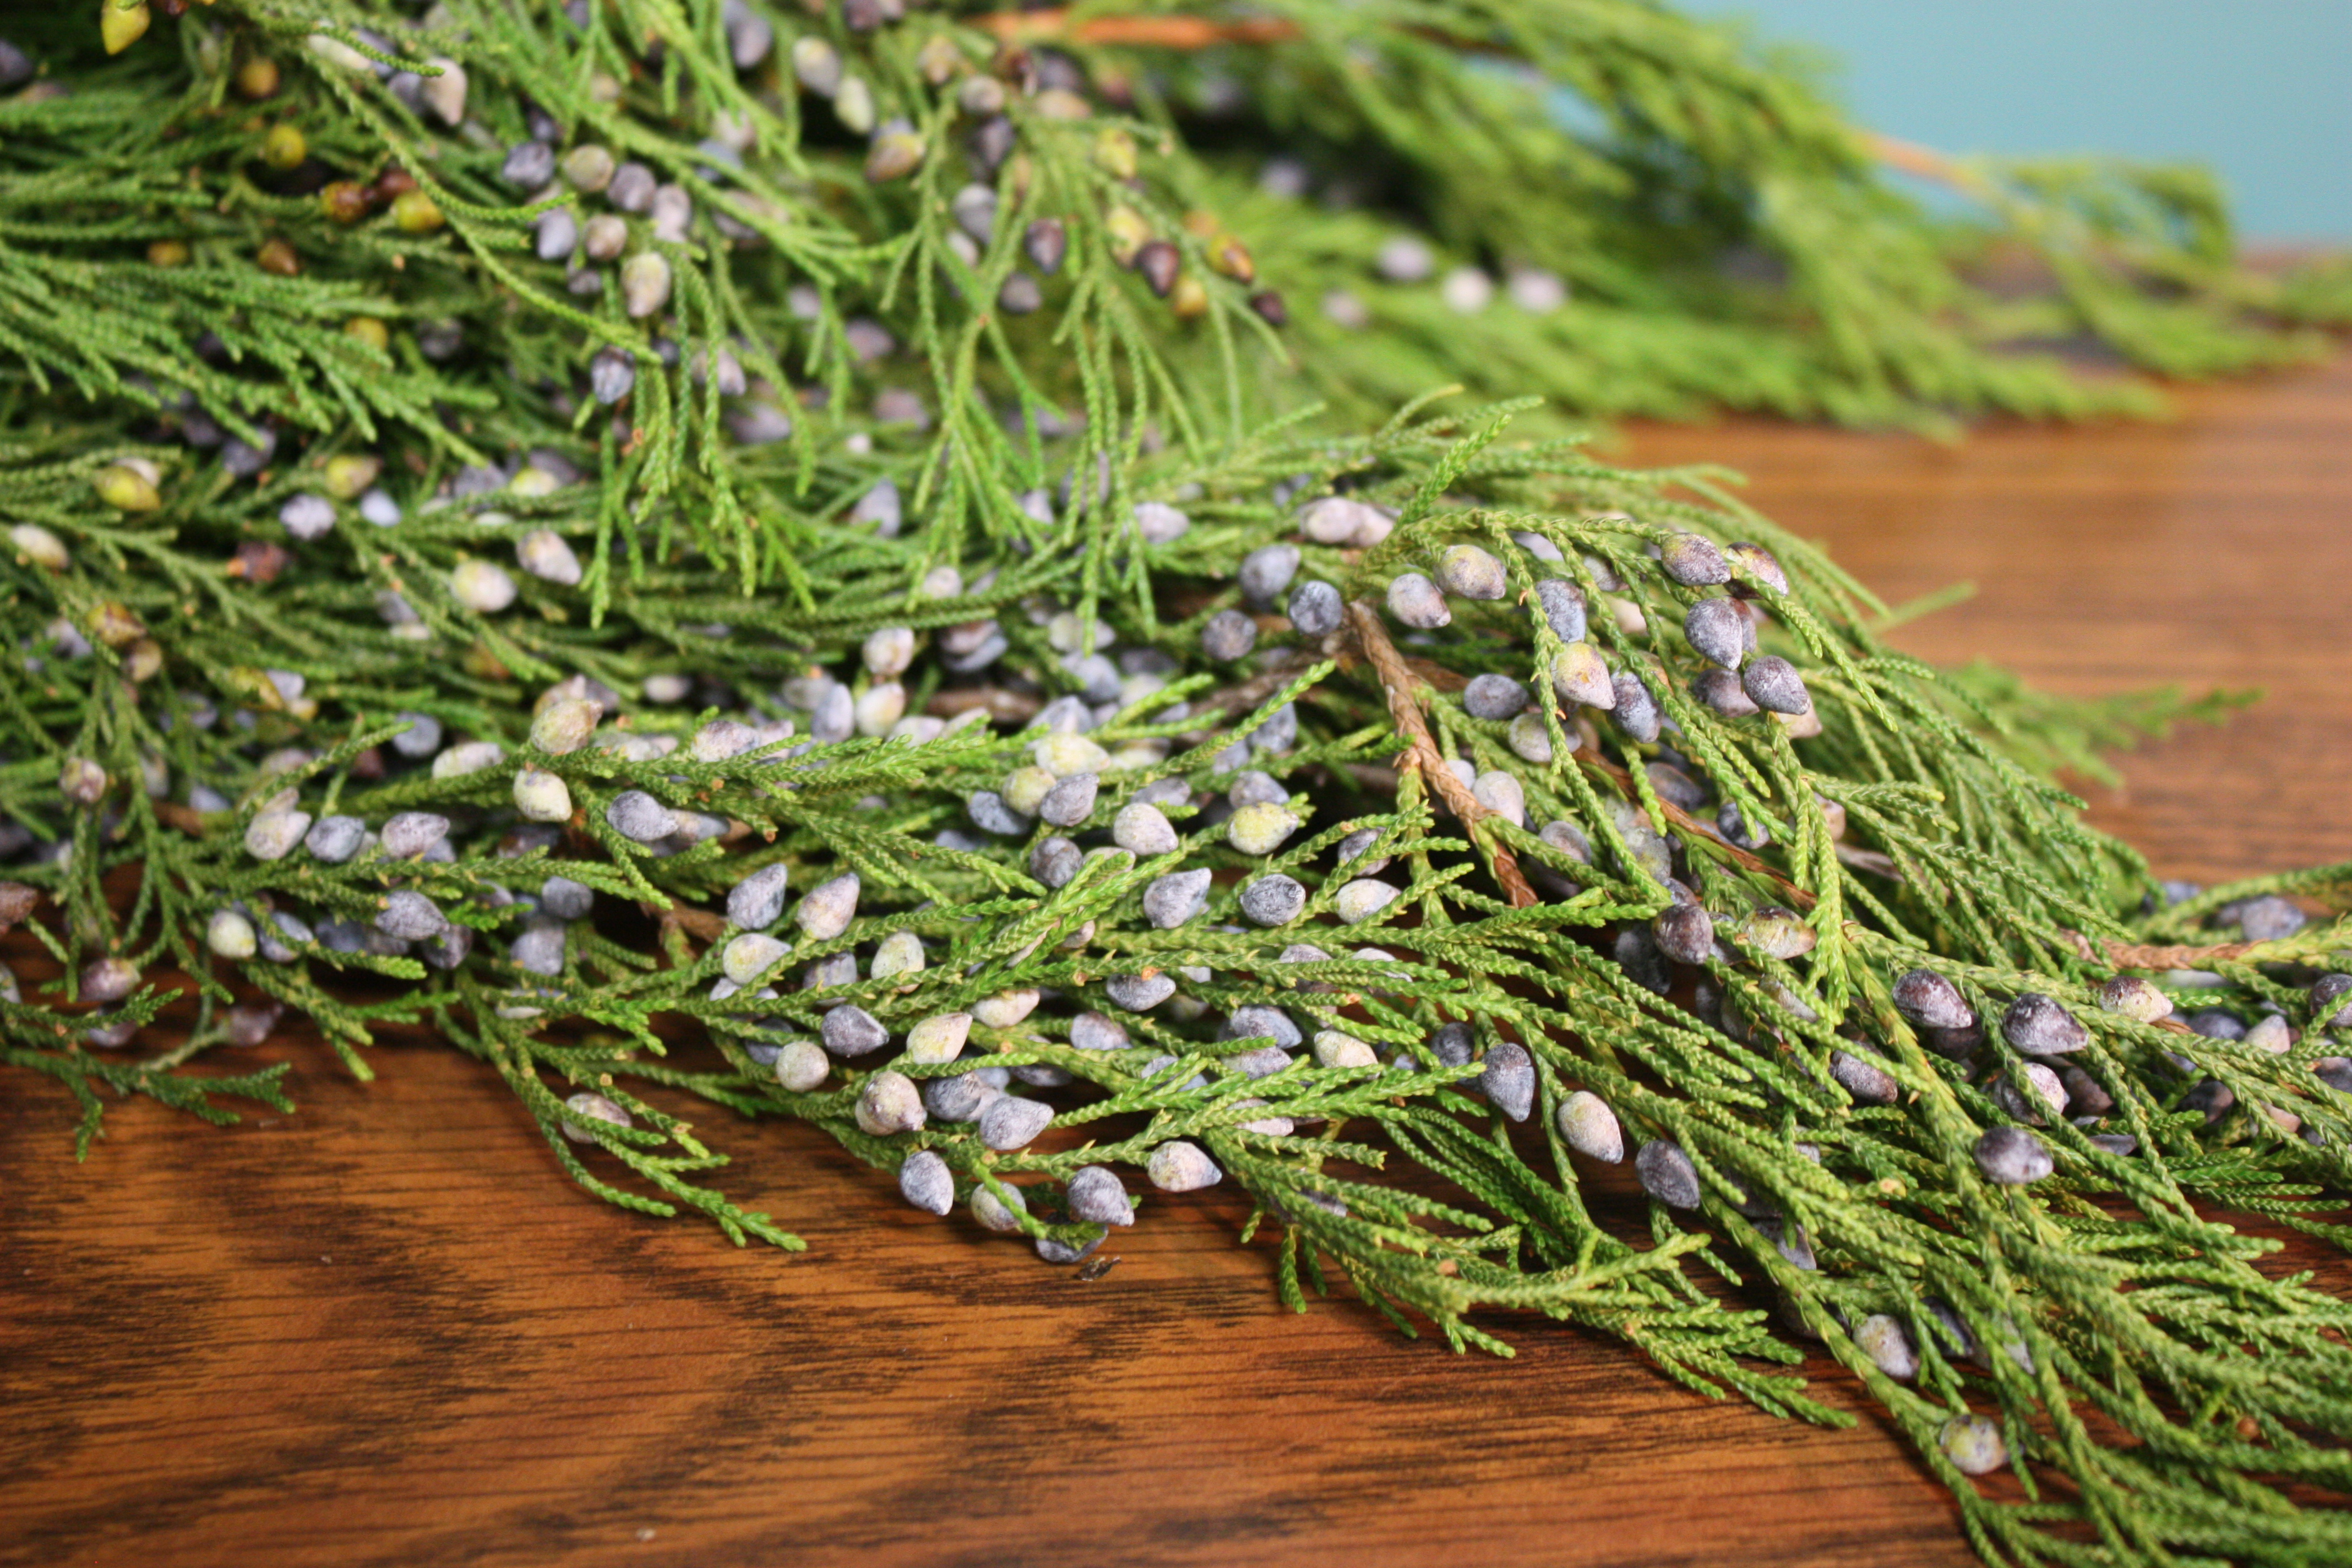 Blueberry Cedar foliage laid on a table — filler greens for bouquets.